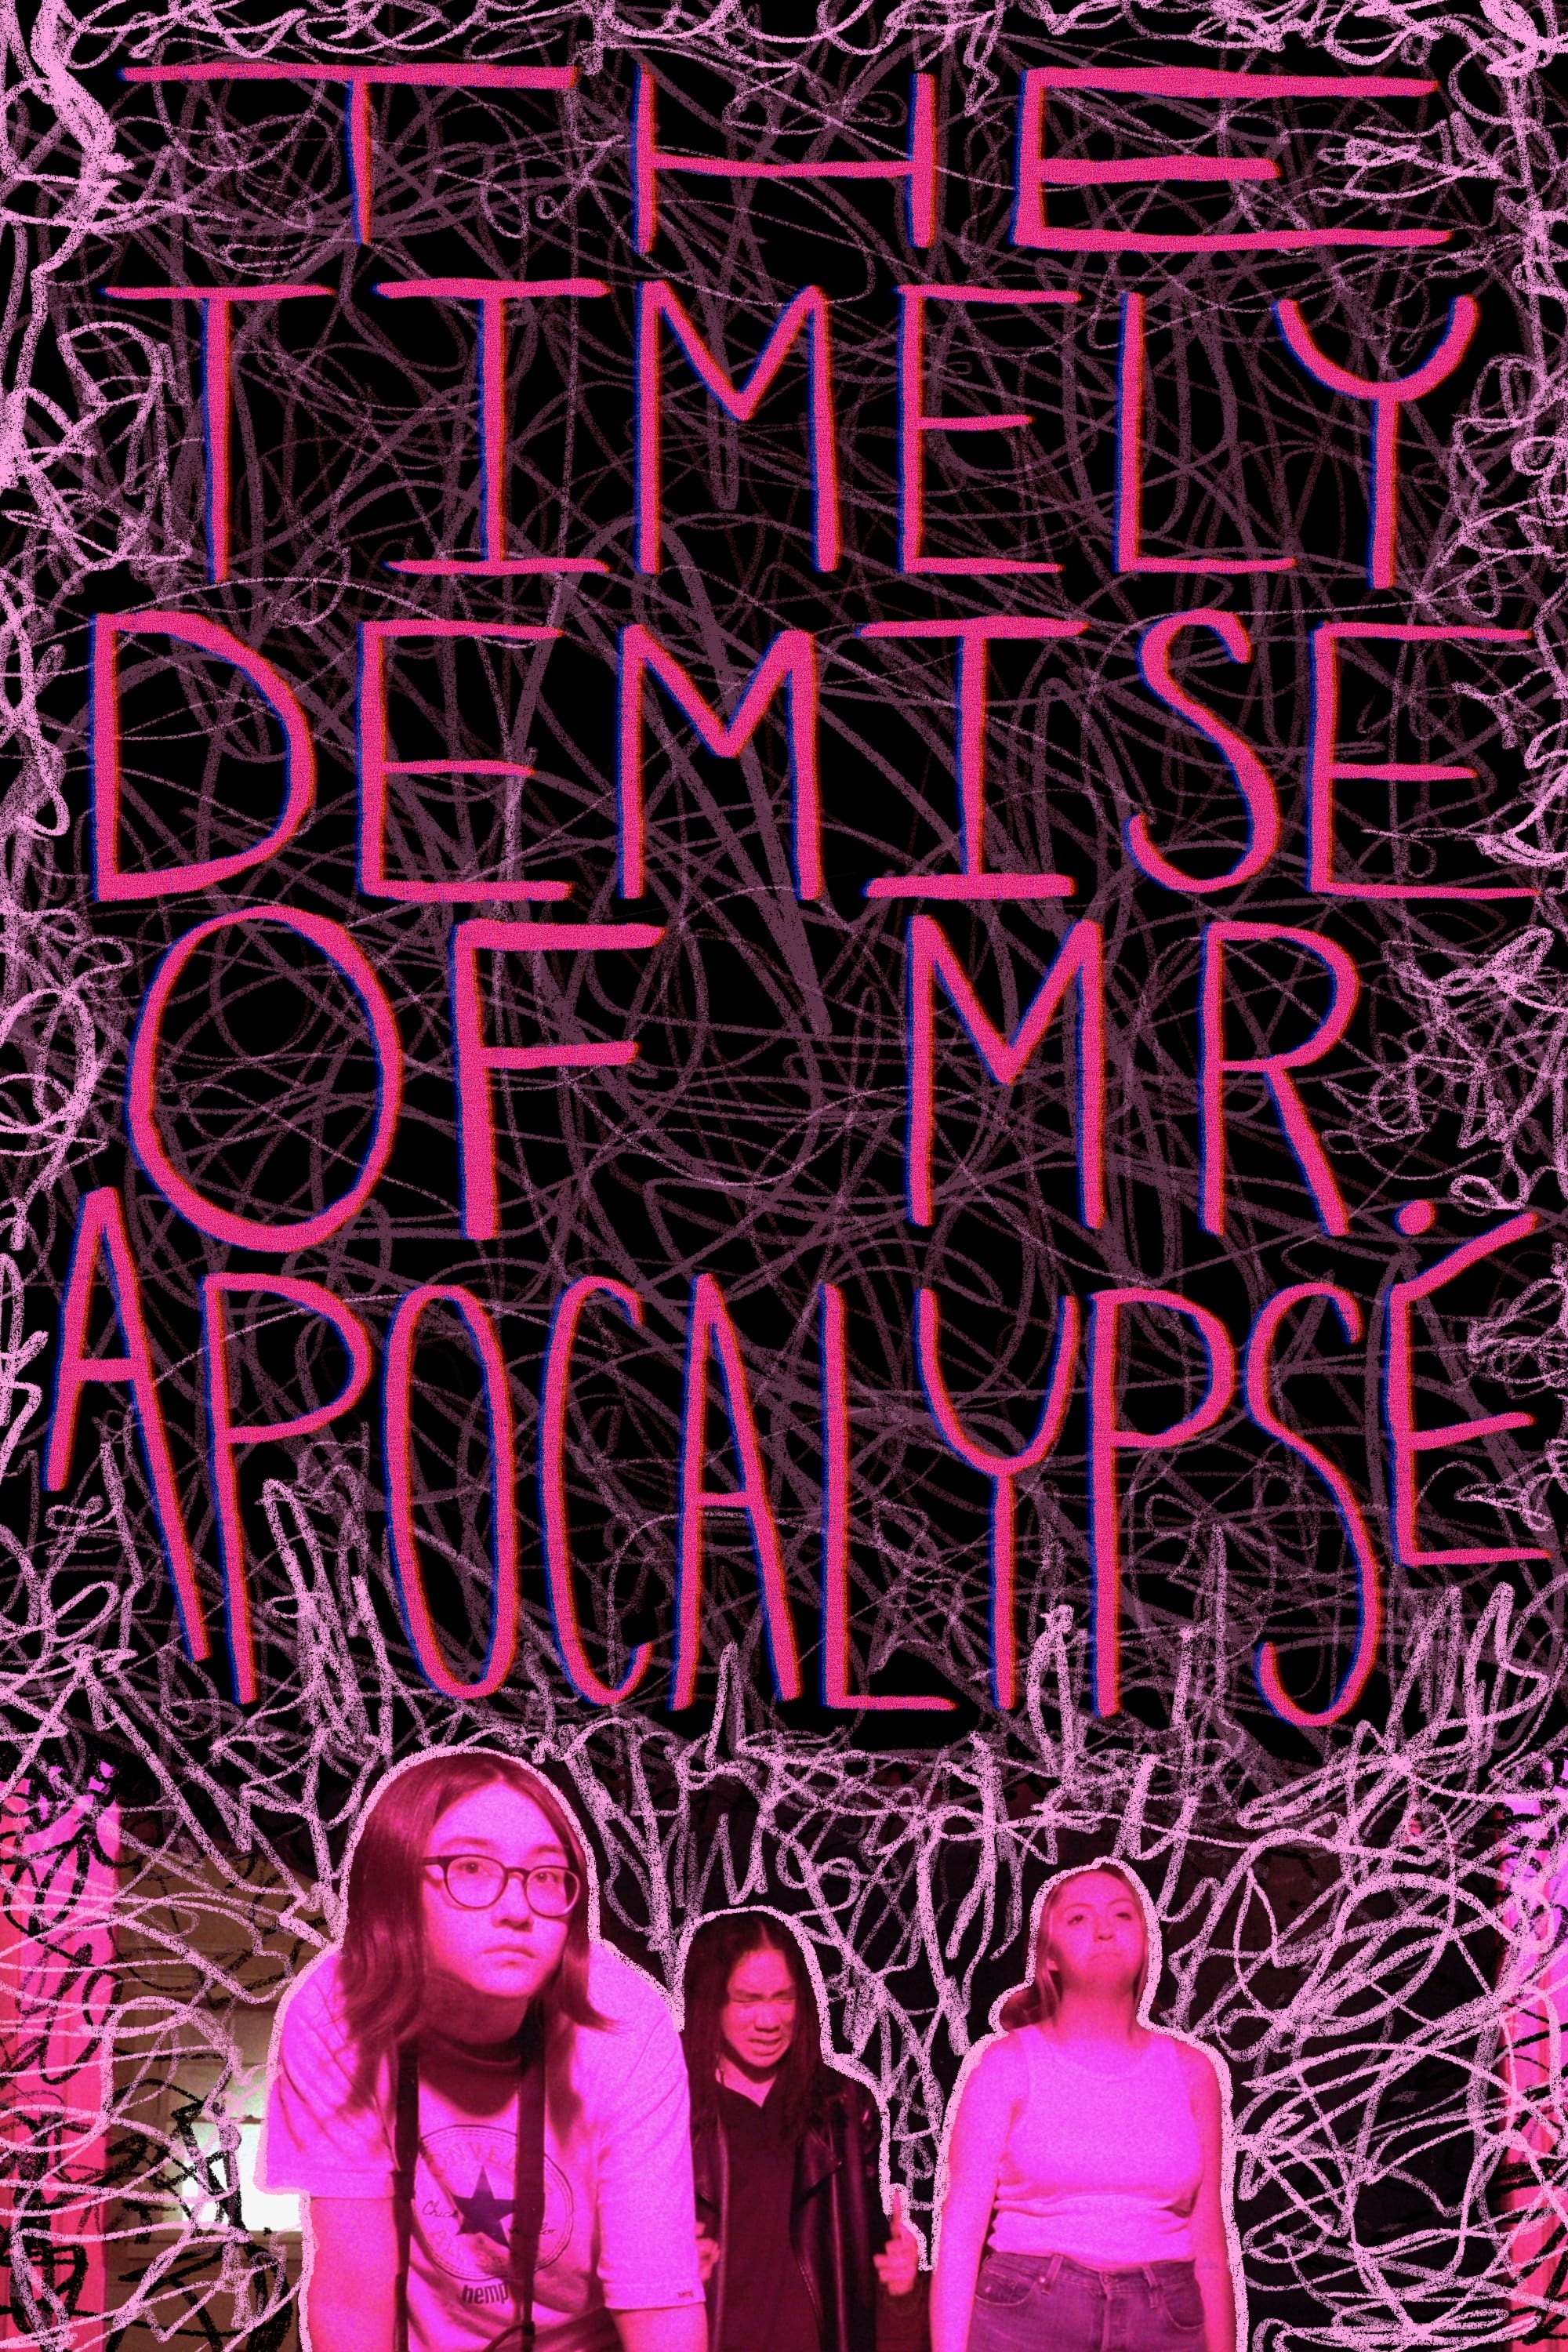 The Timely Demise of Mr. Apocalypse